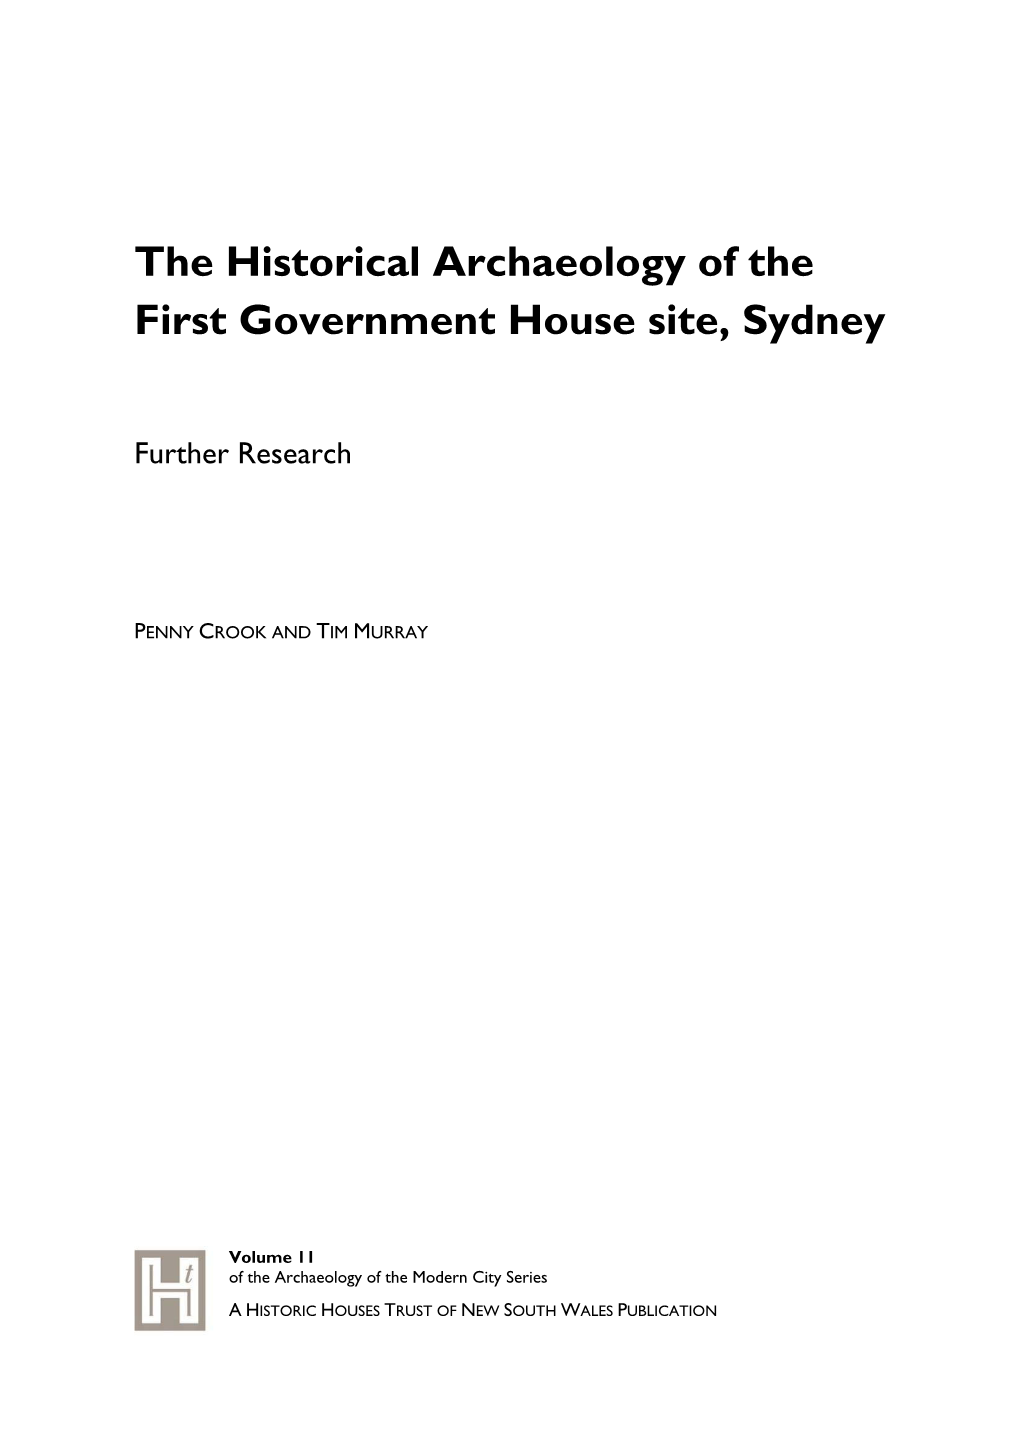 The Historical Archaeology of the First Government House Site, Sydney